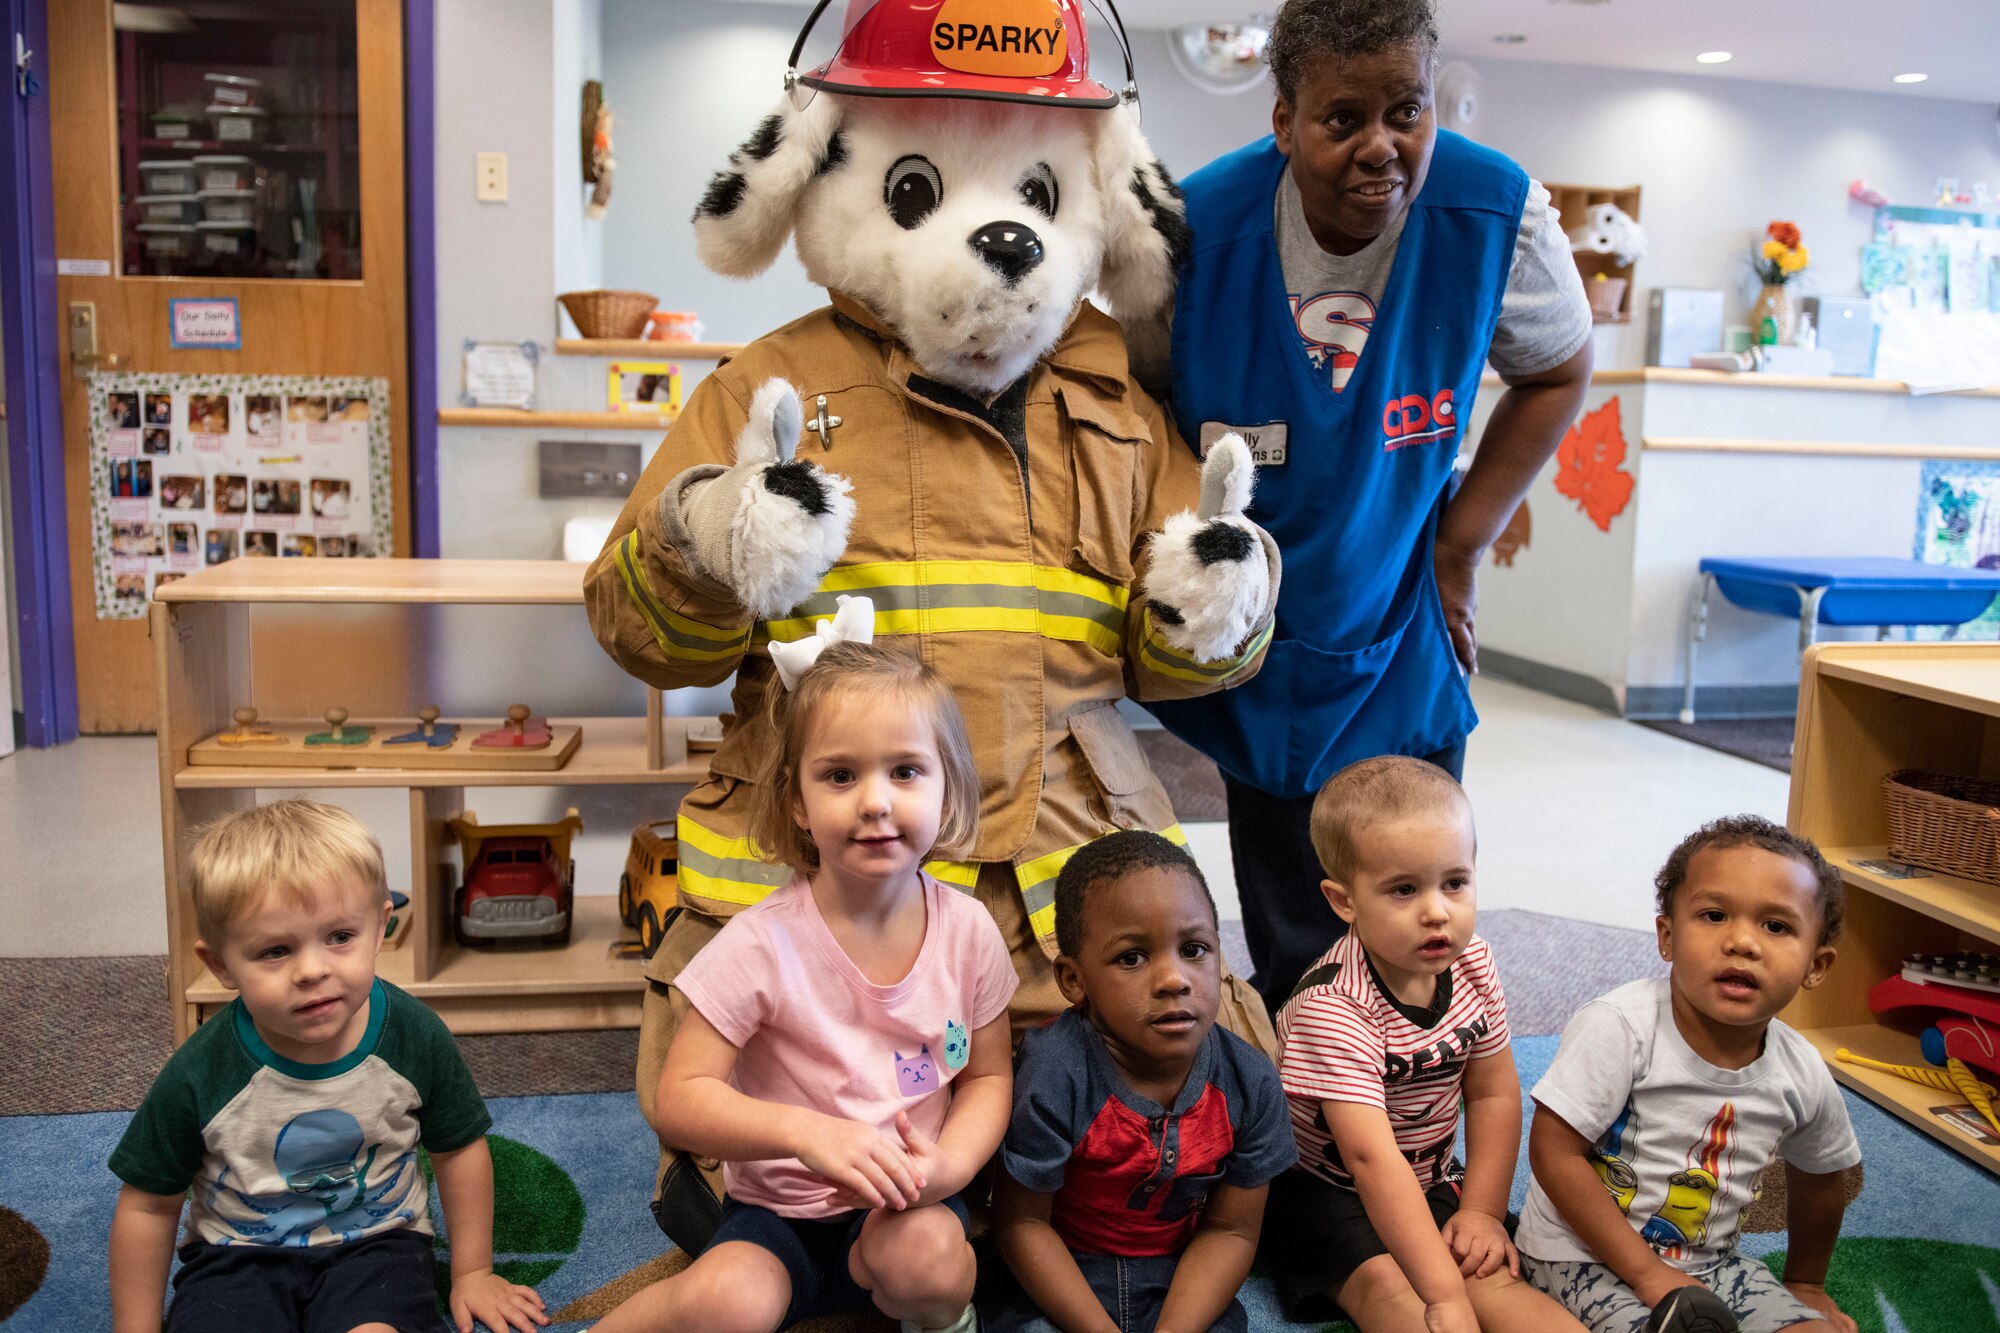 Children from the CDC visit Sparky the Firedog.